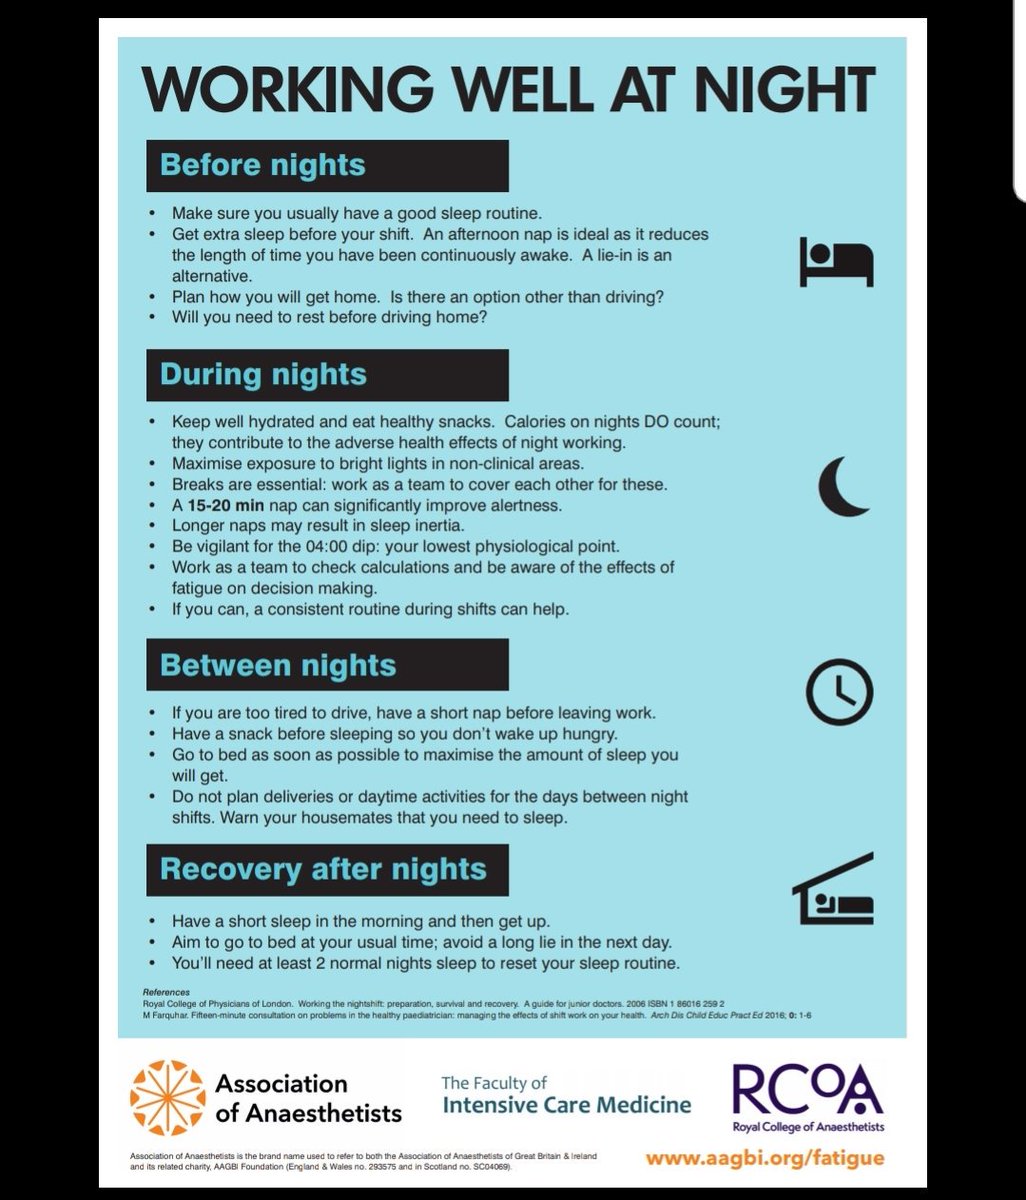 #NightShift. How do you normally spend the day before the first night shift? Do you follow @AAGBI, @FCICM and @RCoANews recommendations or do you have another #recipeforsuccess?

#FightFatigue